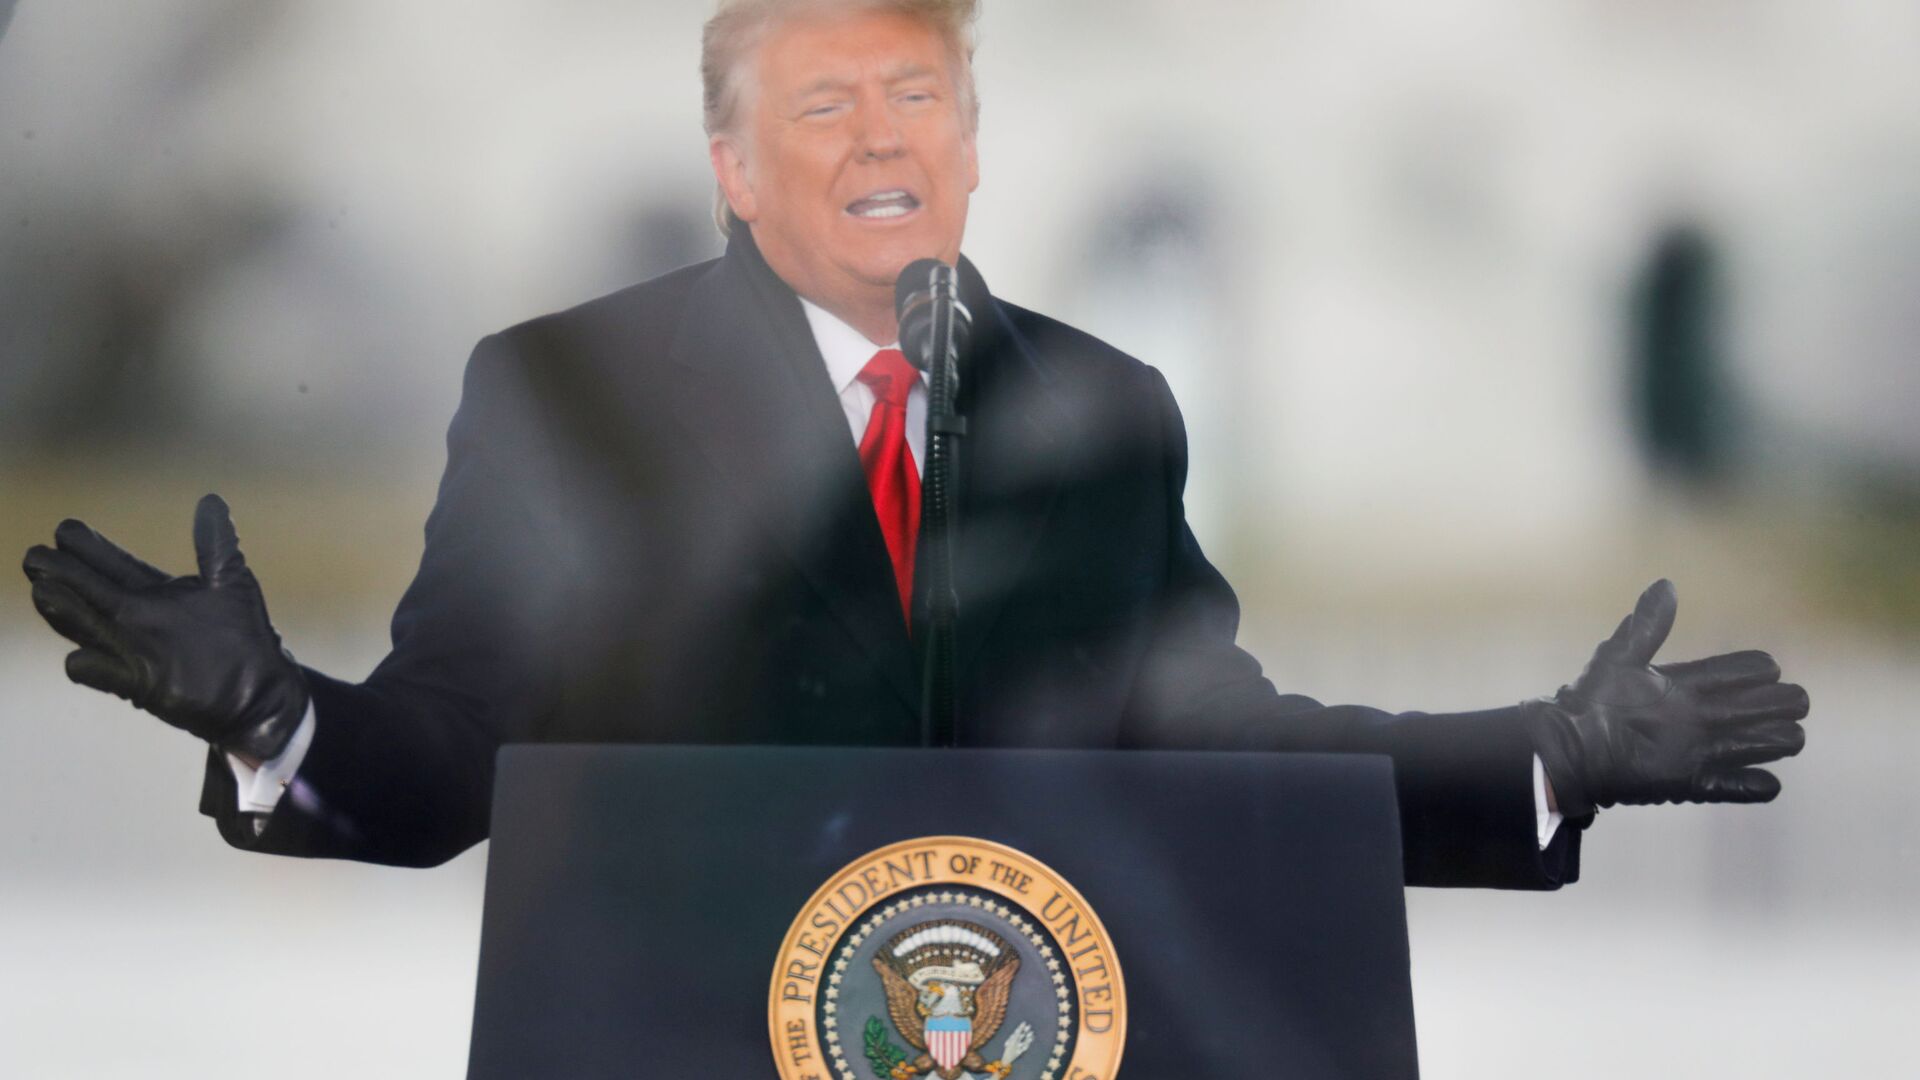 US President Donald Trump speaks during a rally to contest the certification of the 2020 presidential election results by the US Congress, in Washington, DC, US, 6 January 2021. REUTERS/Jim Bourg/File Photo - Sputnik International, 1920, 11.03.2021